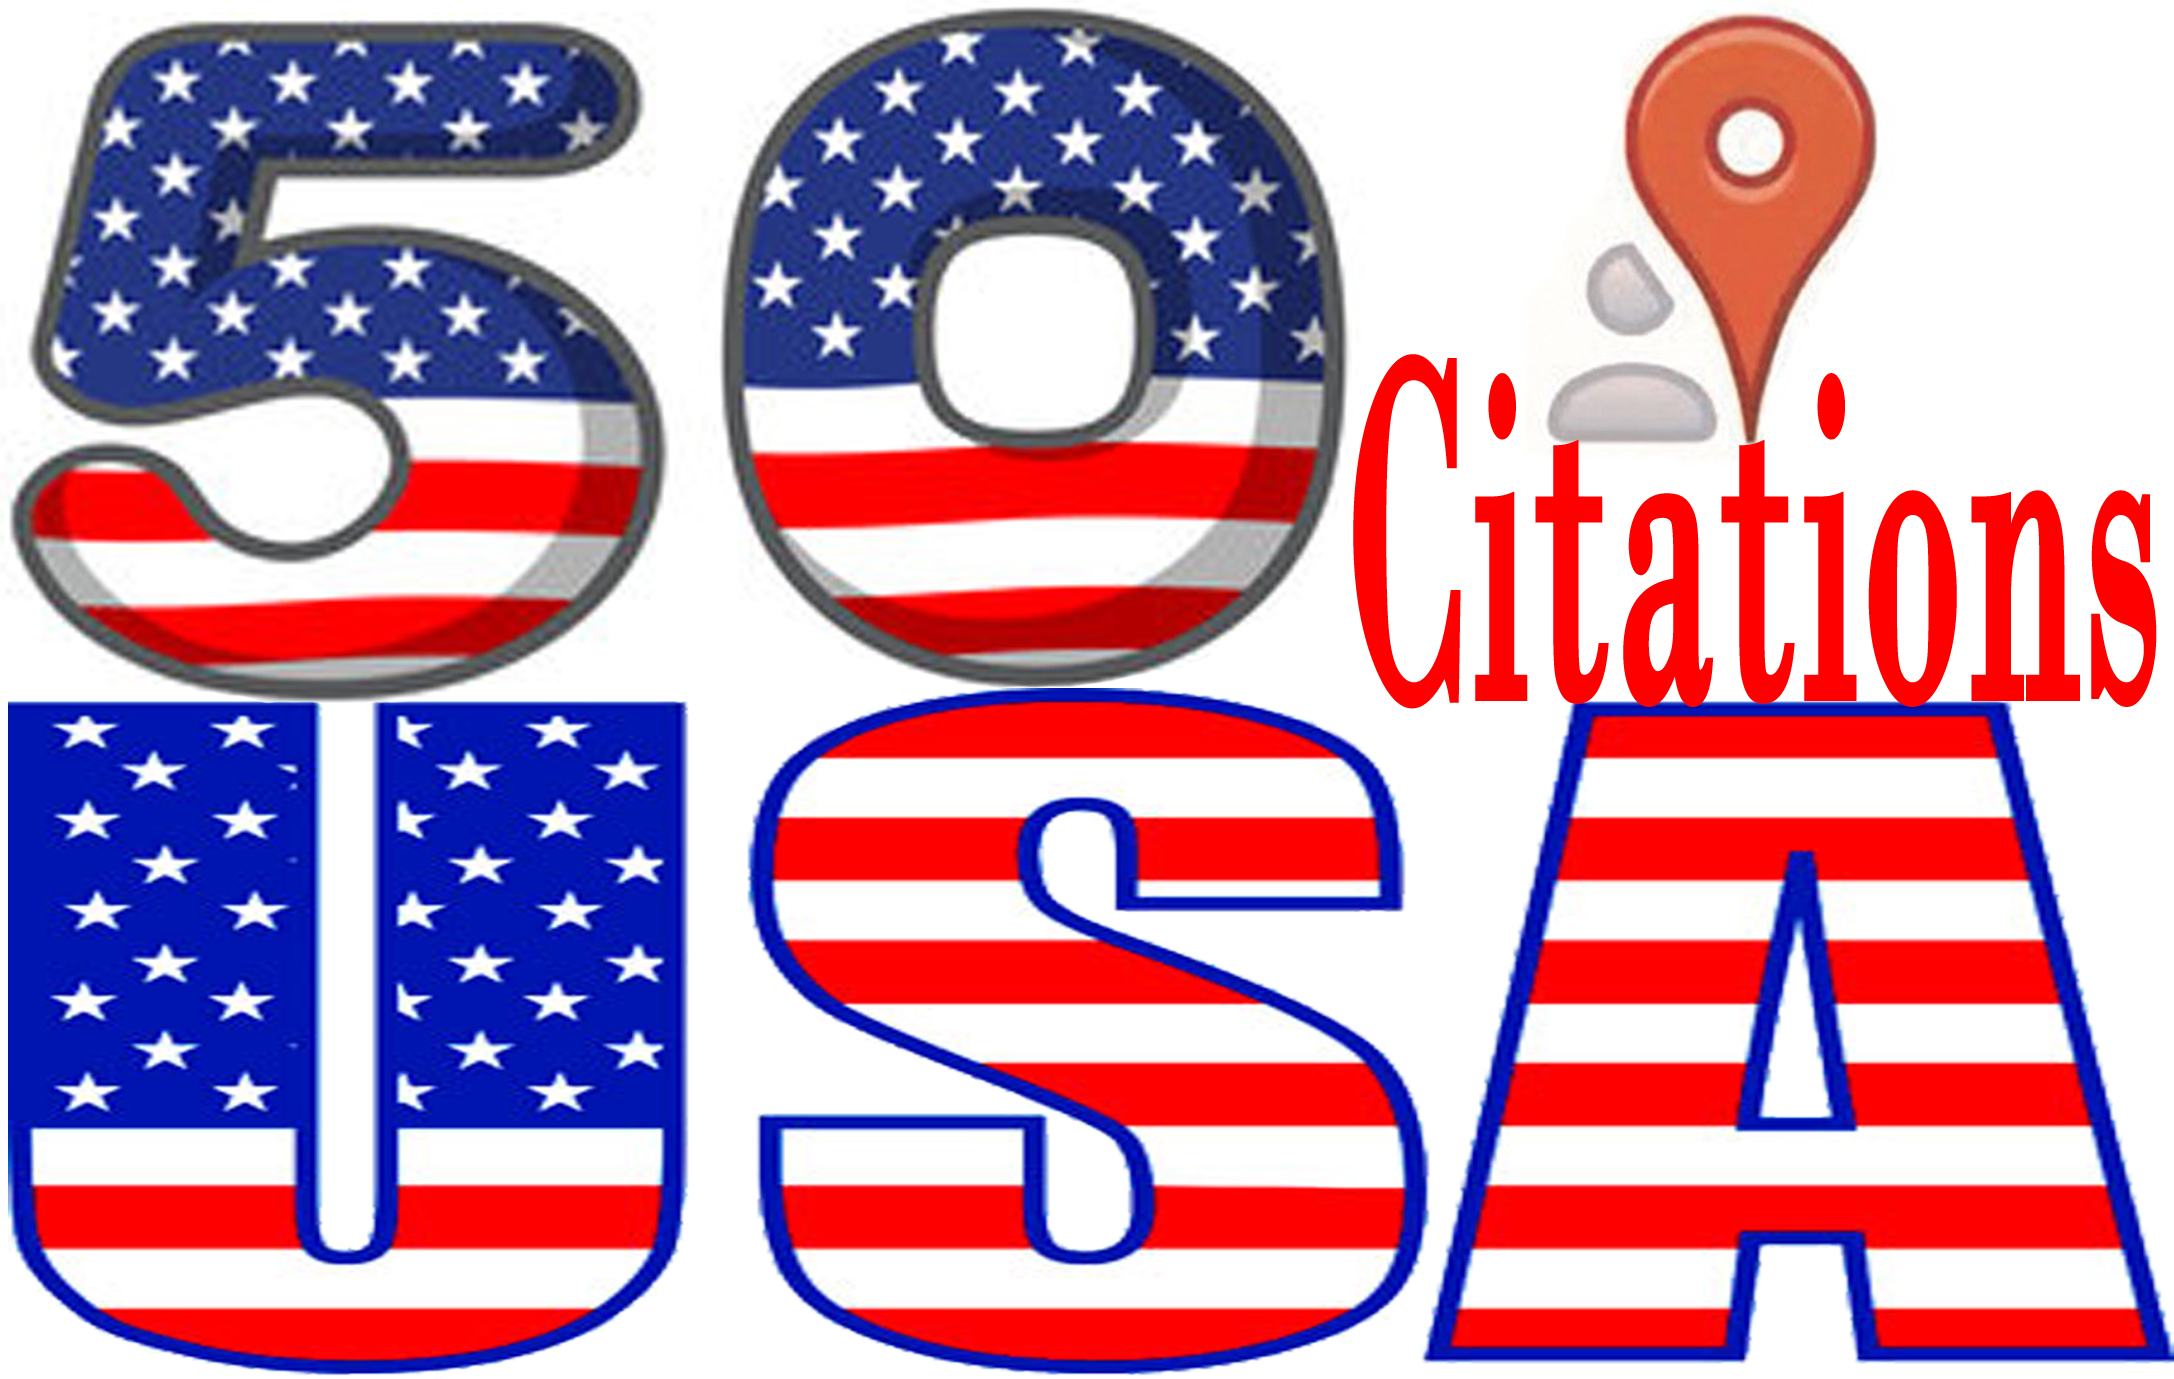 do 50 Live USA local citations for your local business. I always ensure best quality work.